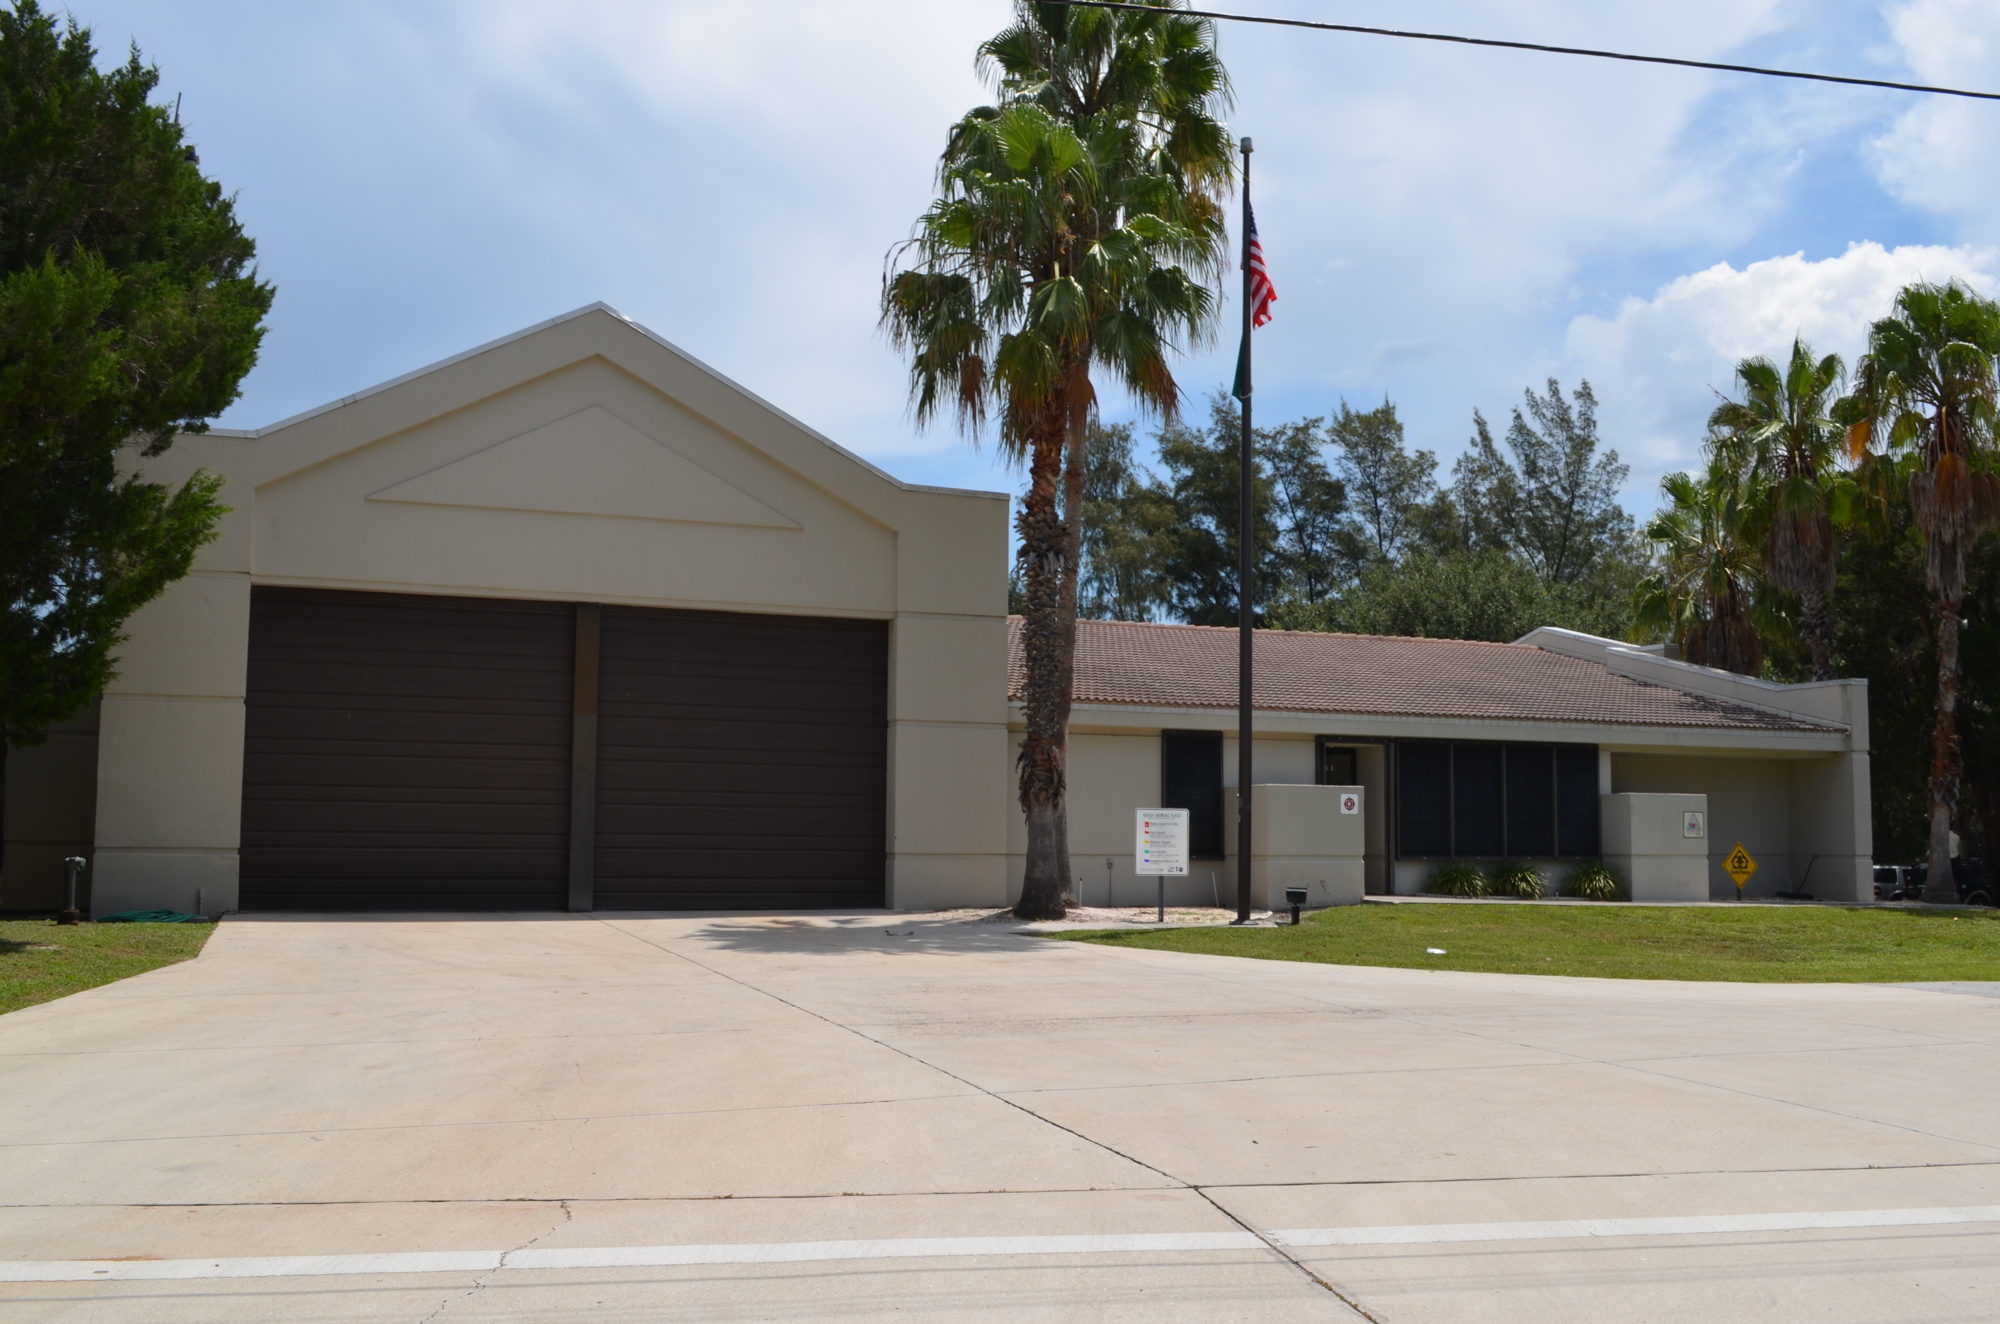 Town Manager Dave Bullock is hopeful Longboat Key south fire station repairs will come with a price tag well below $2.3 million.